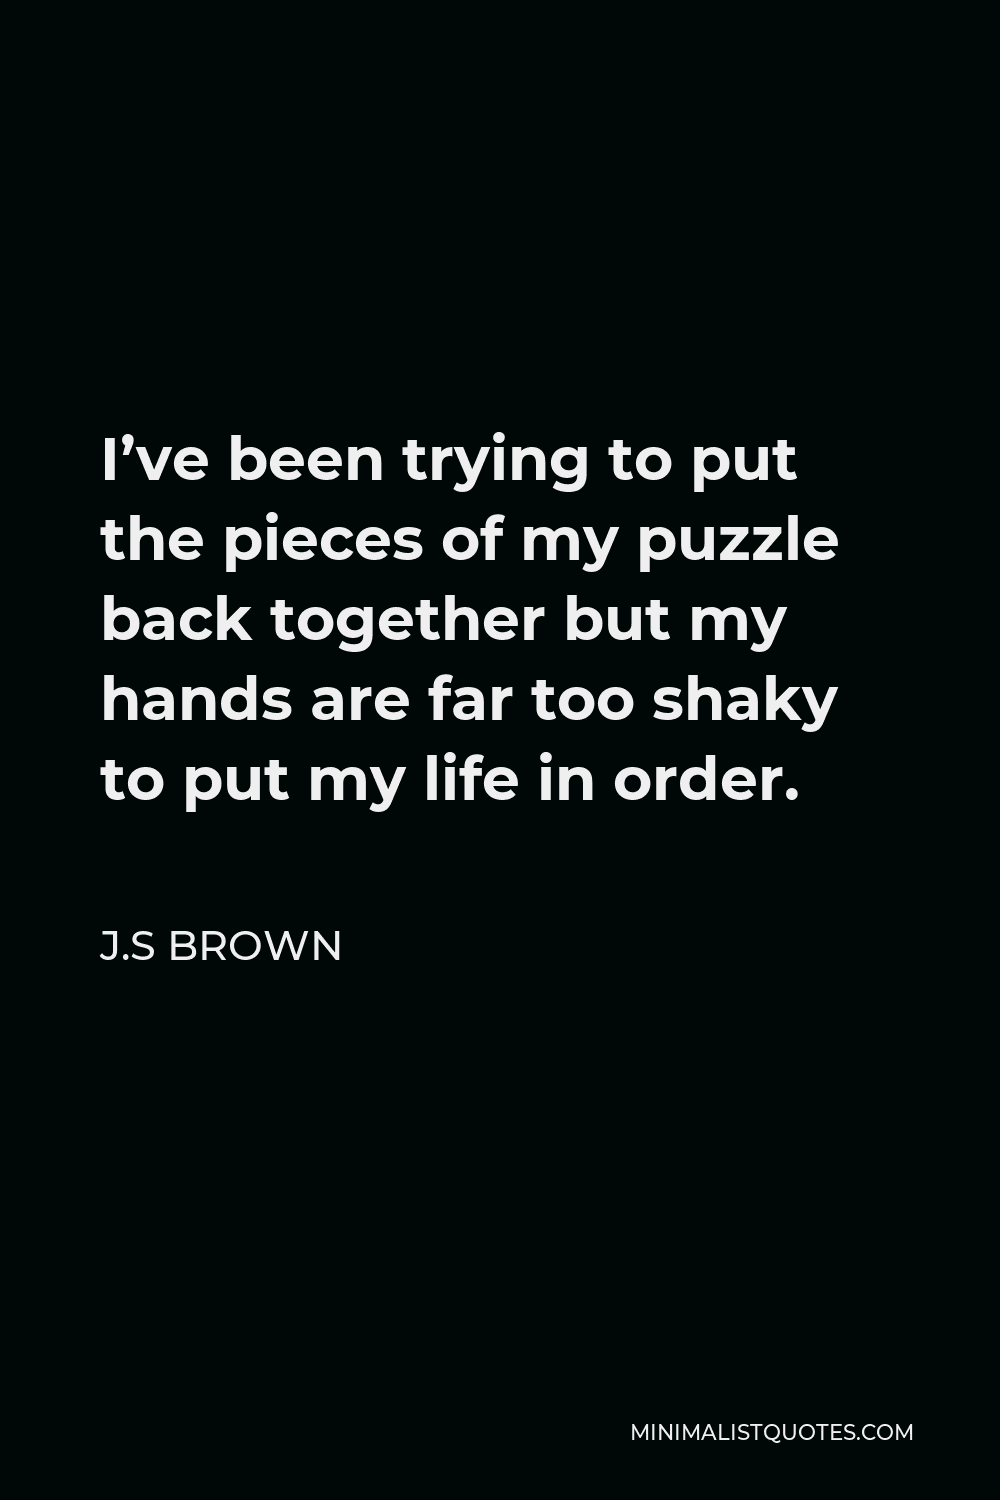 J.S Brown Quote - I’ve been trying to put the pieces of my puzzle back together but my hands are far too shaky to put my life in order.